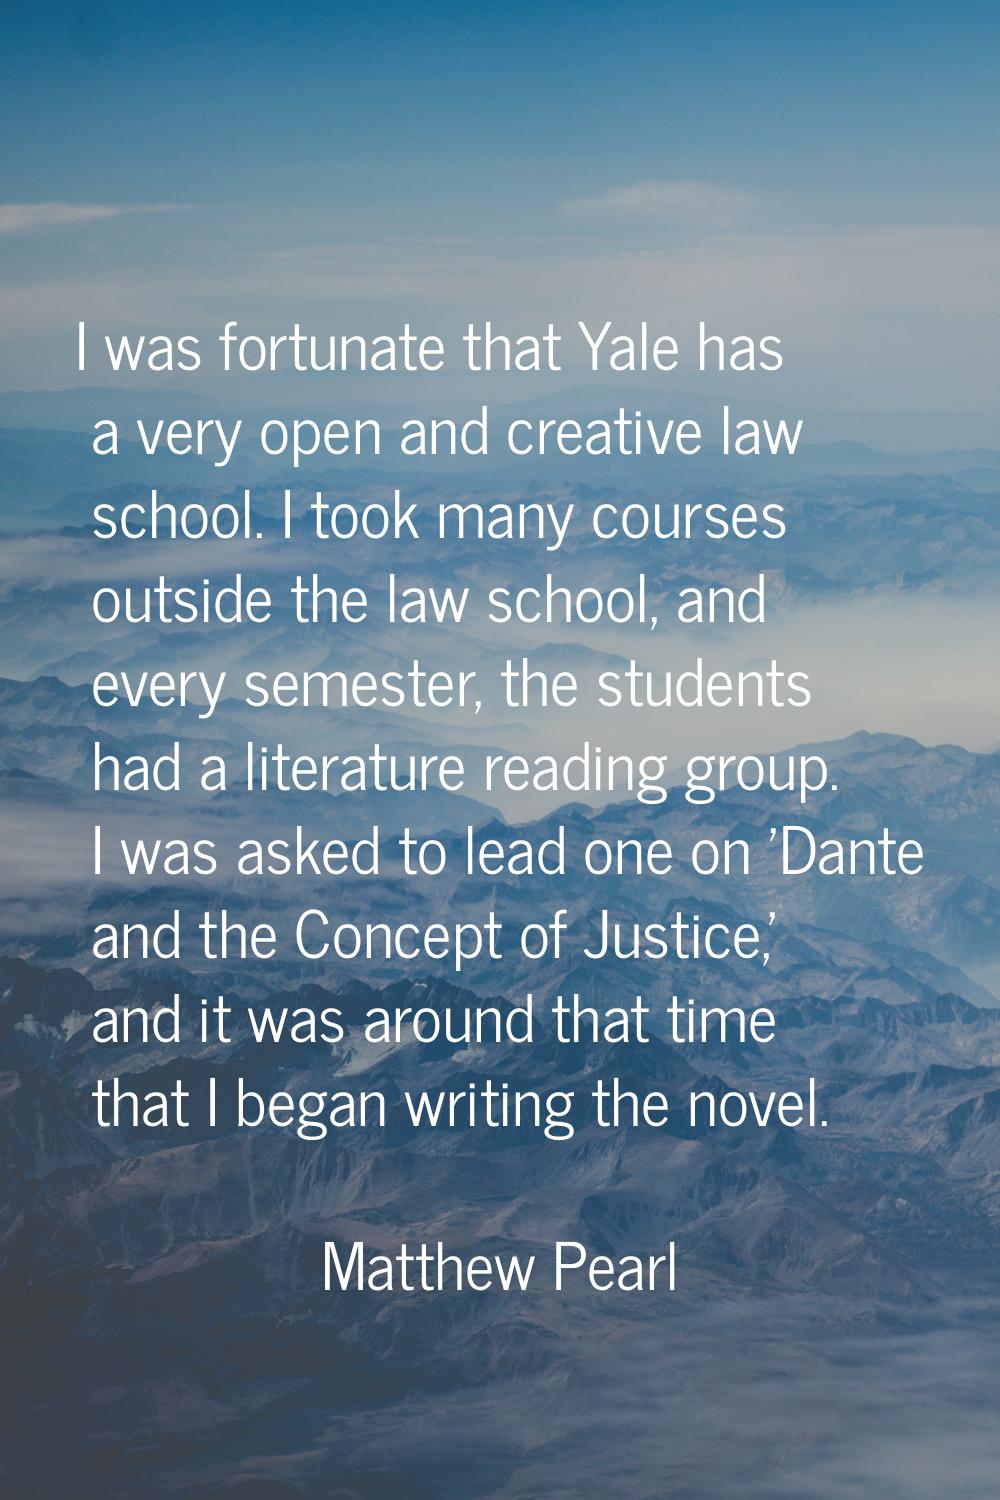 I was fortunate that Yale has a very open and creative law school. I took many courses outside the 